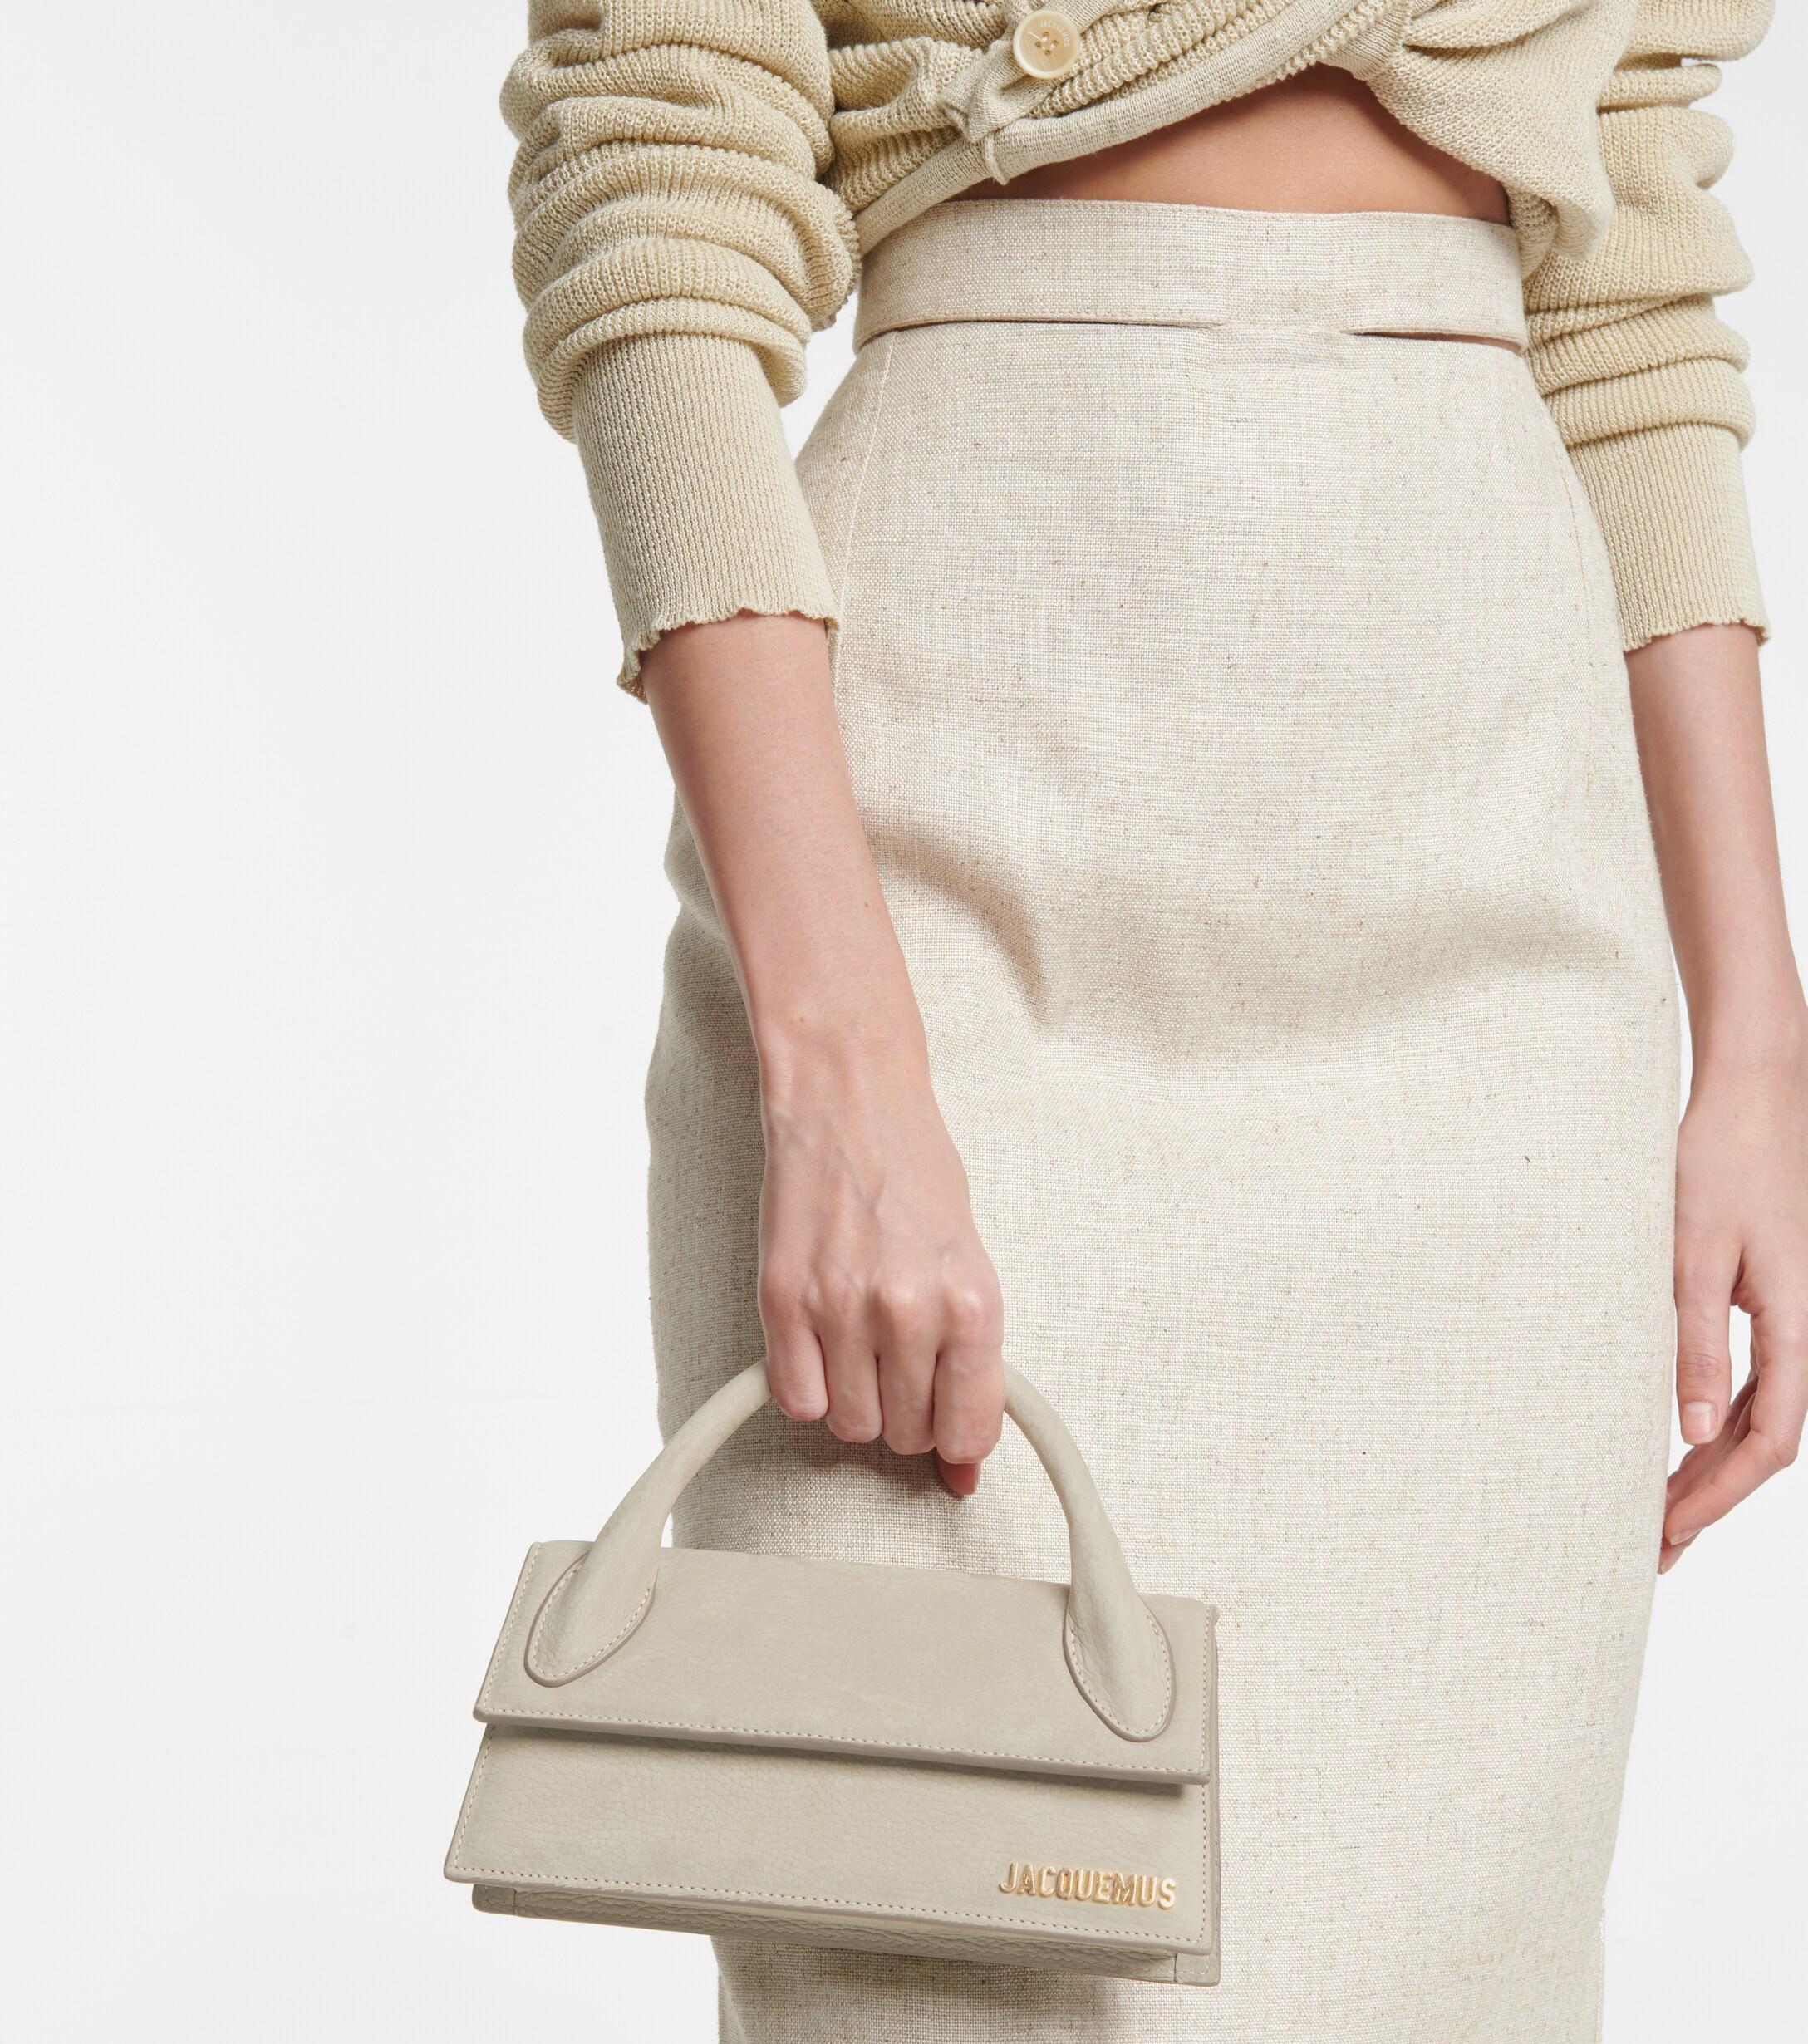 Jacquemus Le Chiquito Long Leather Shoulder Bag in Natural | Lyst